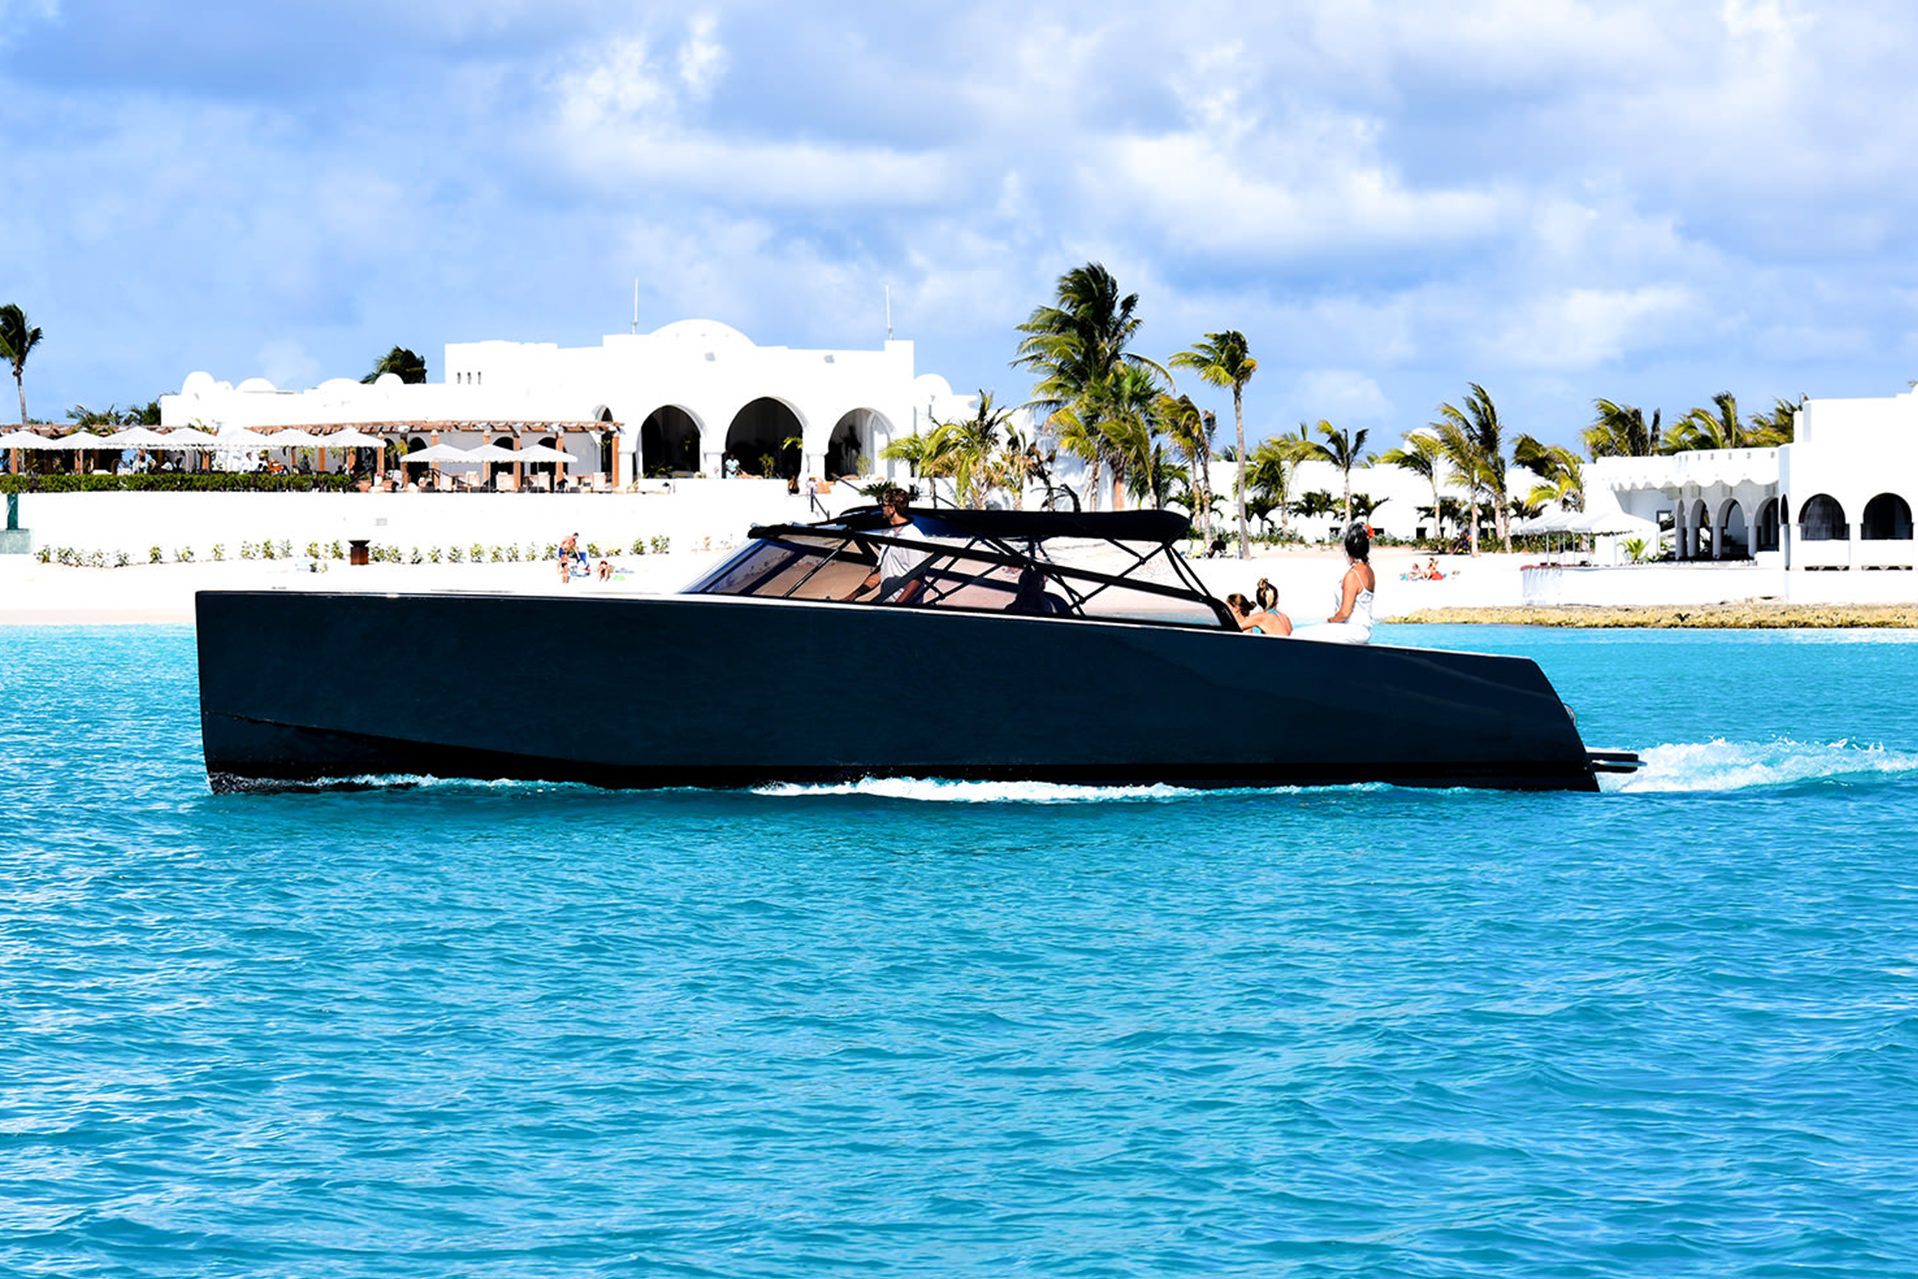 The VanDutch 40 is an elegantly designed yacht, with clean lines.